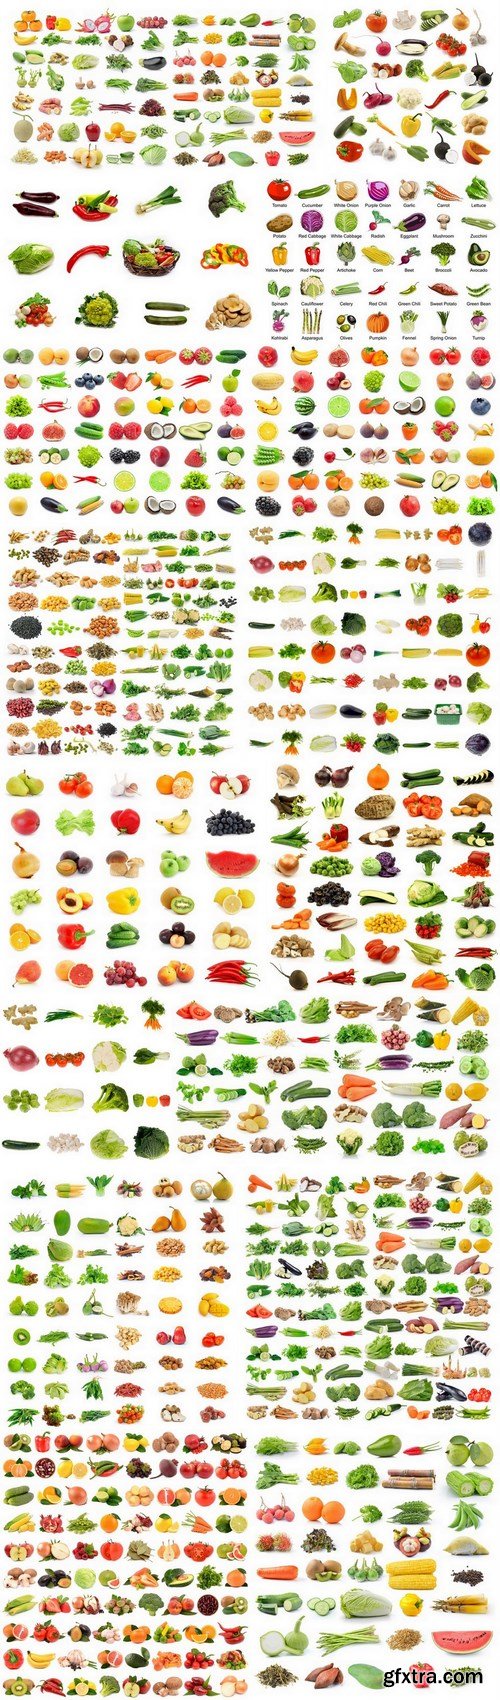 Fruit and Vegetable Isolated on White Background - 16xUHQ JPEG Photo Stock (Копировать)